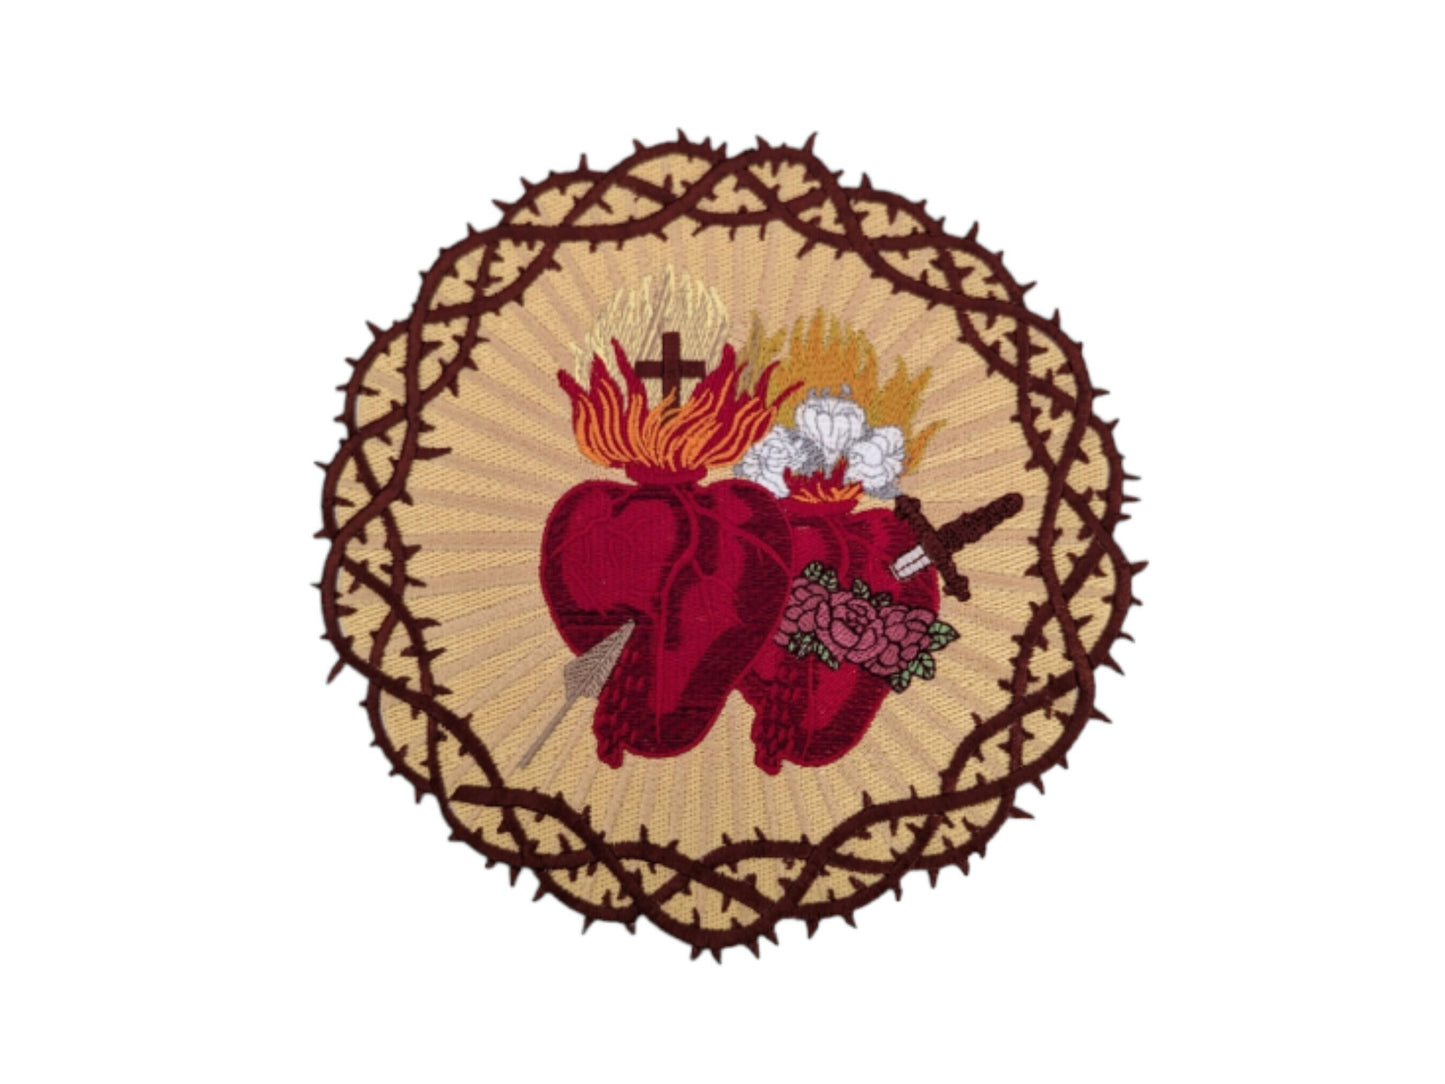 Sacred Heart of Jesus, Immaculate Heart of Mary, Orphrey, Vestment making, sew on patch, embroidered badge, embroidered, Jesus